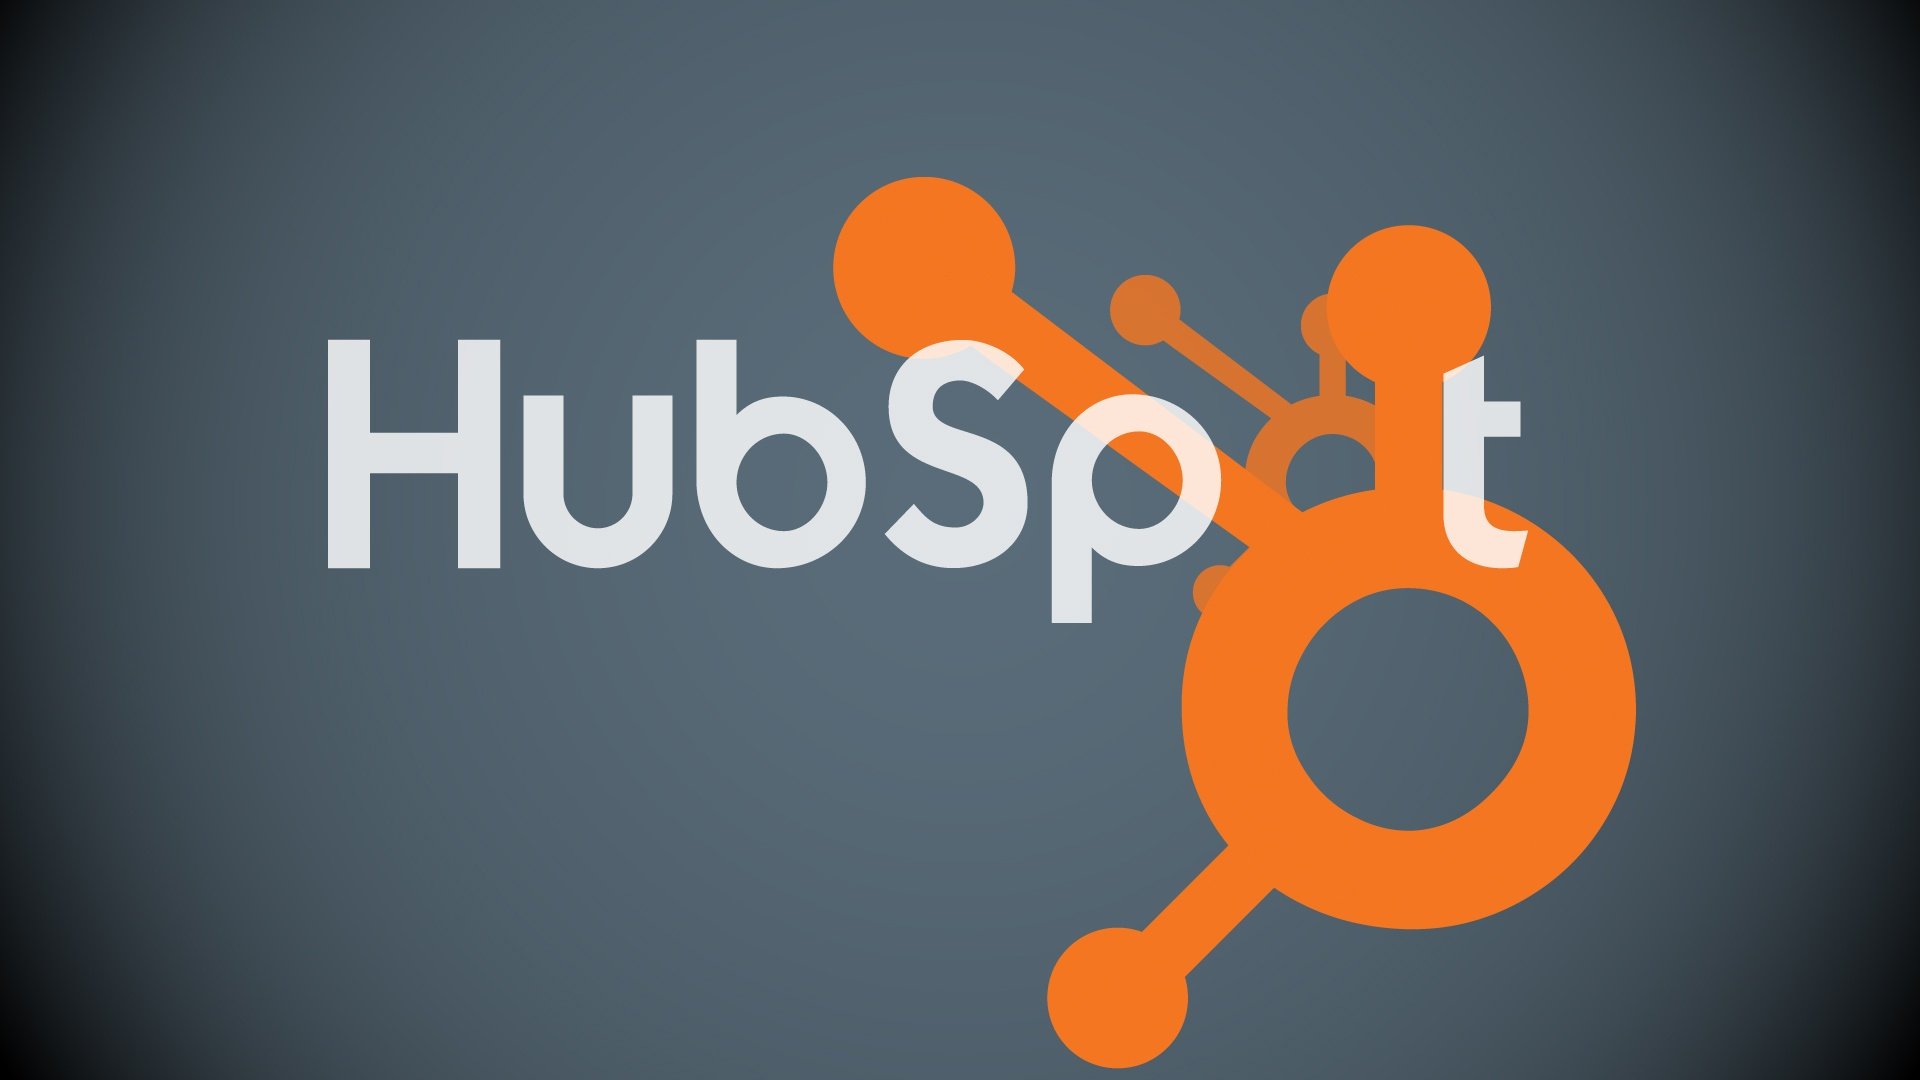 On-Target! Marketing & Advertising | Digital Marketers & Advertisers In Houston, Texas | Does My Company Need HubSpot?